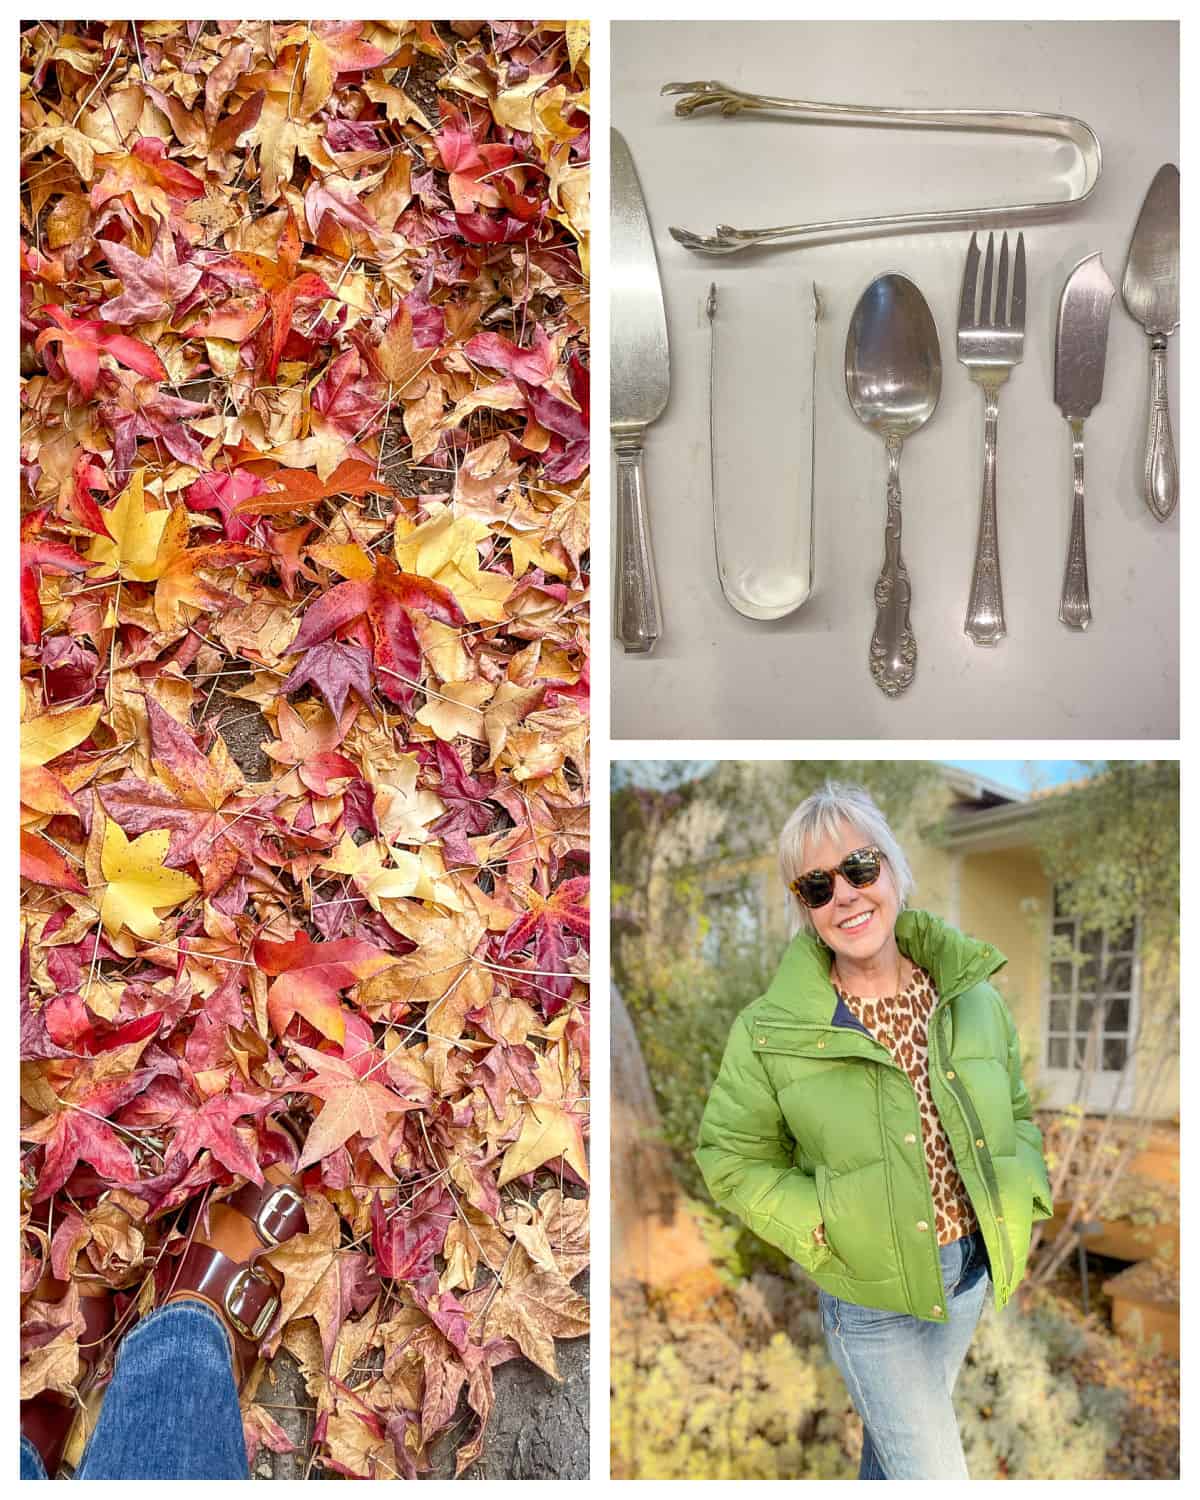 What’s new chez nous: loving these last weeks of autumn